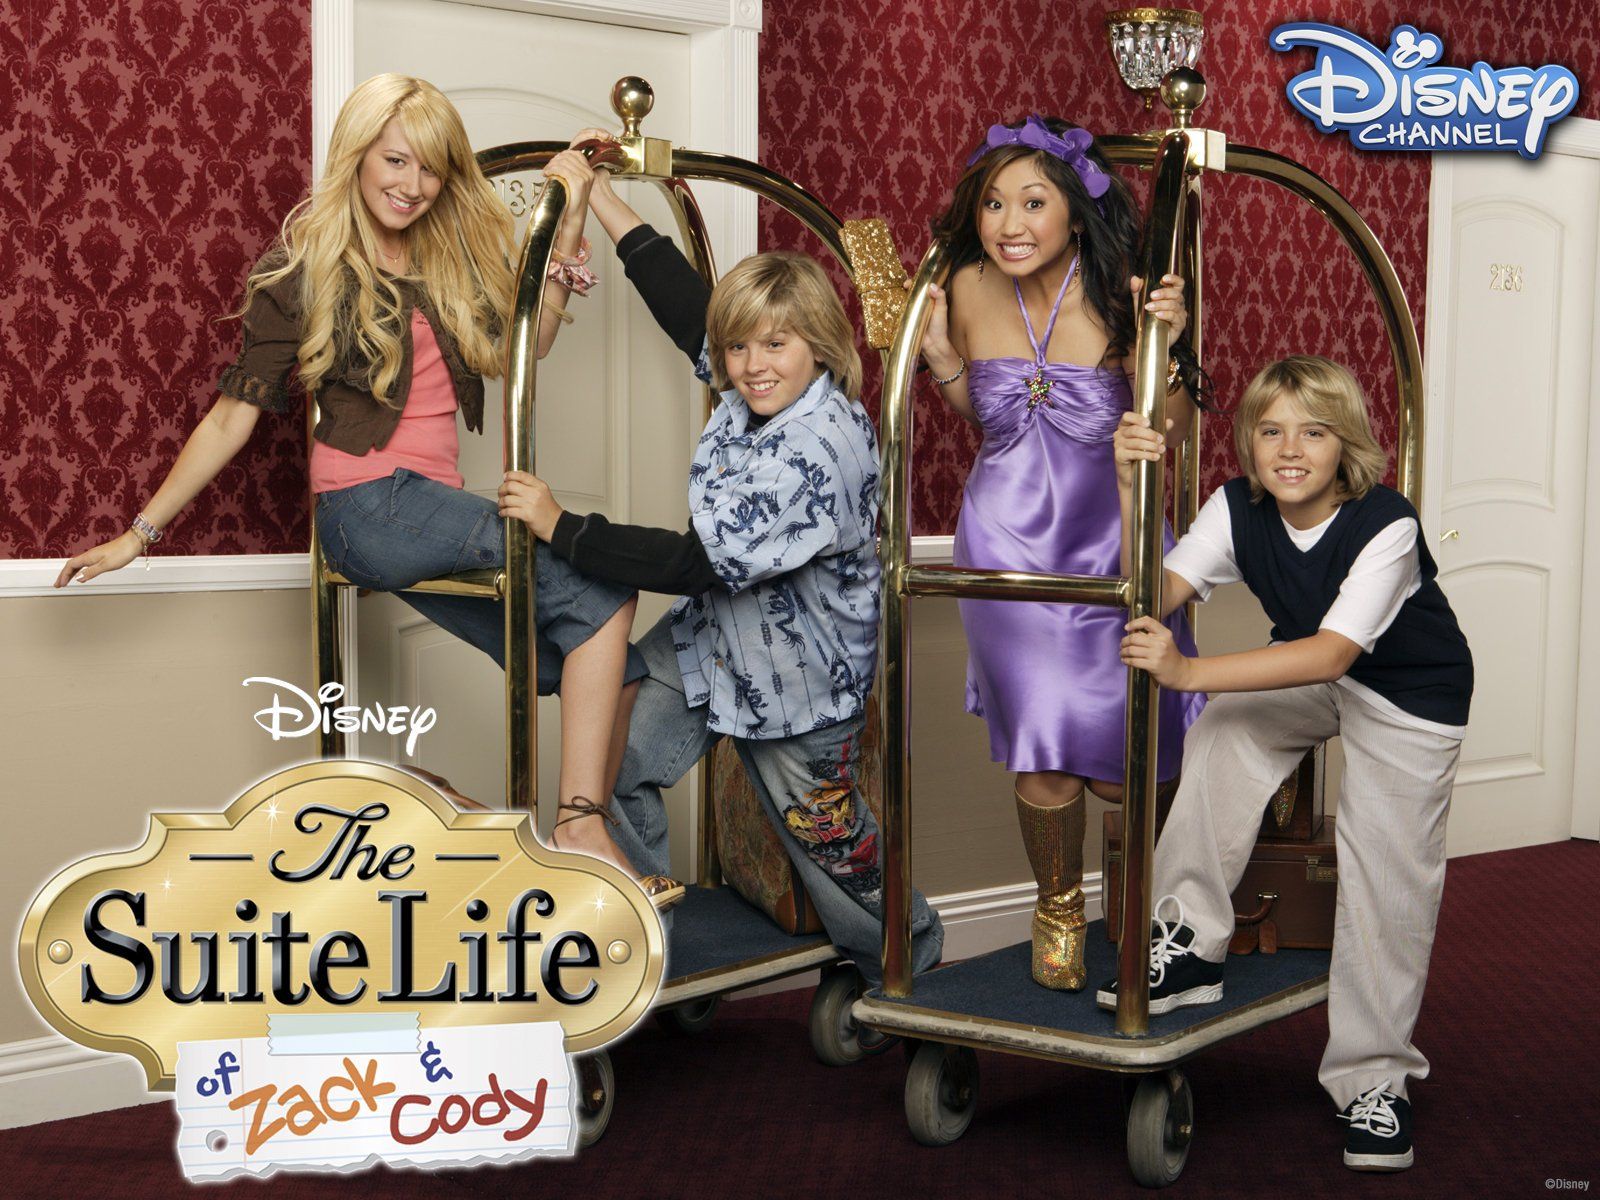 Watch The Suite Life of Zack & Cody Volume 7